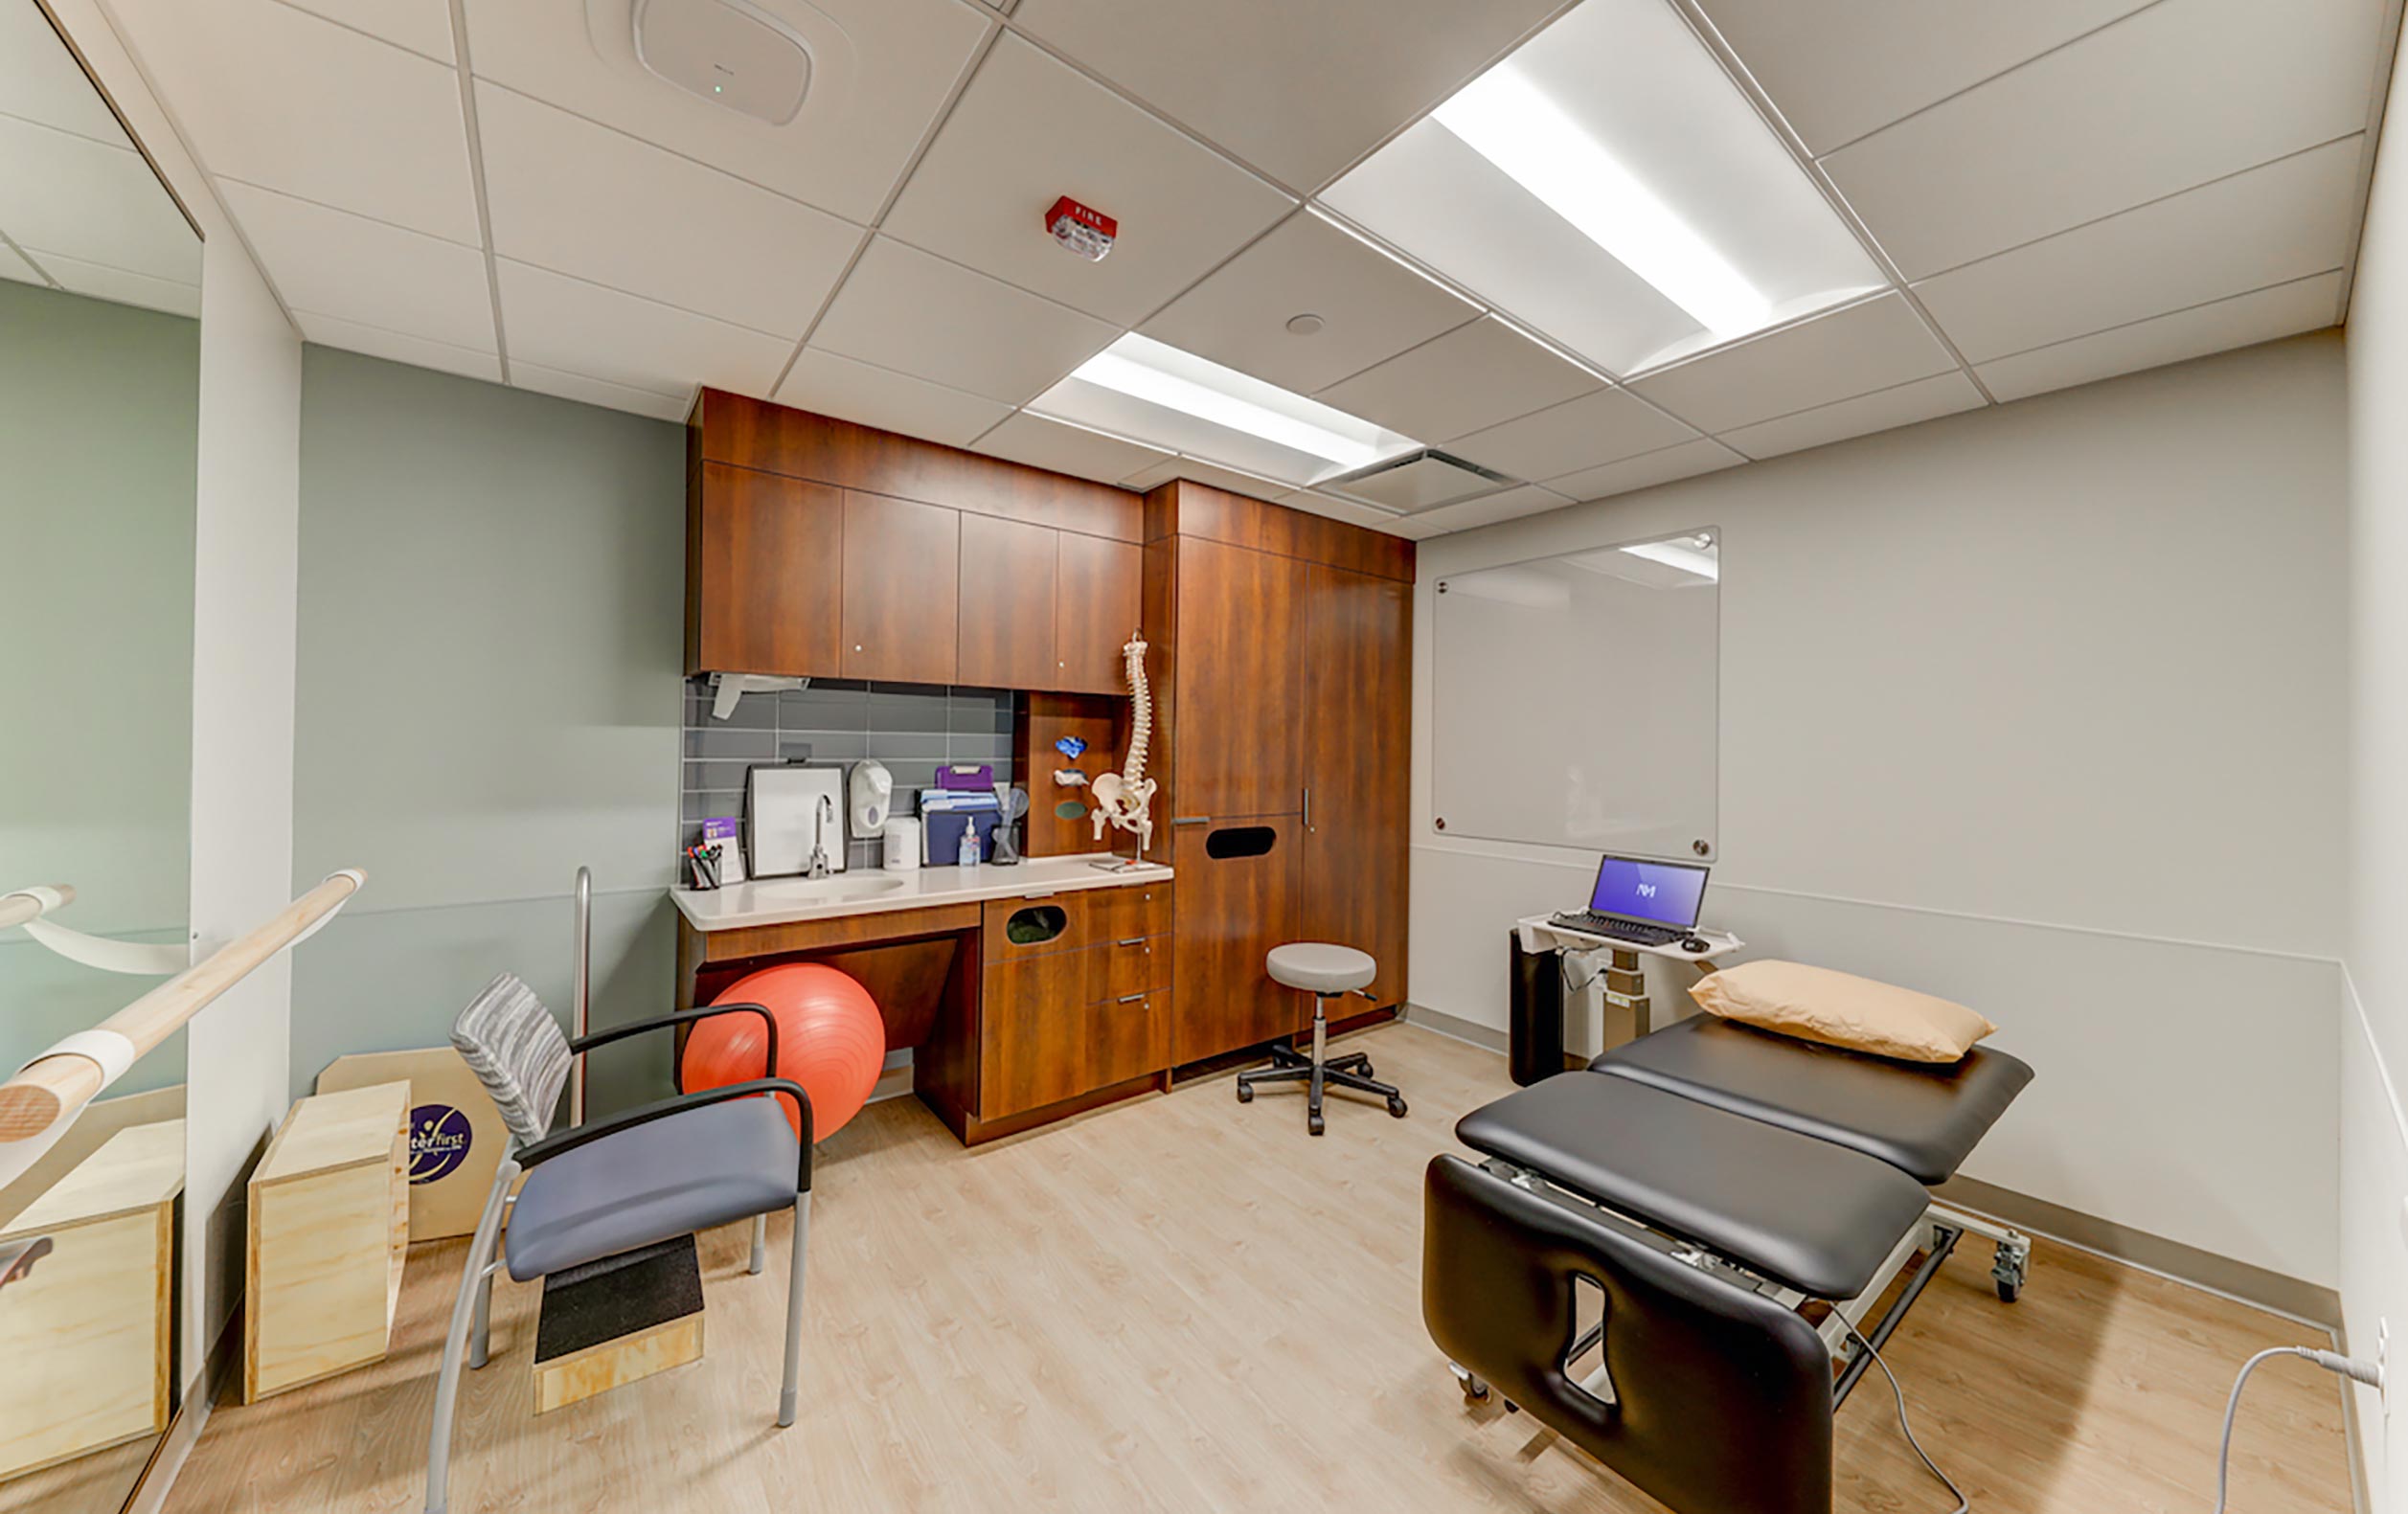 Physical therapy room with focus on spine health